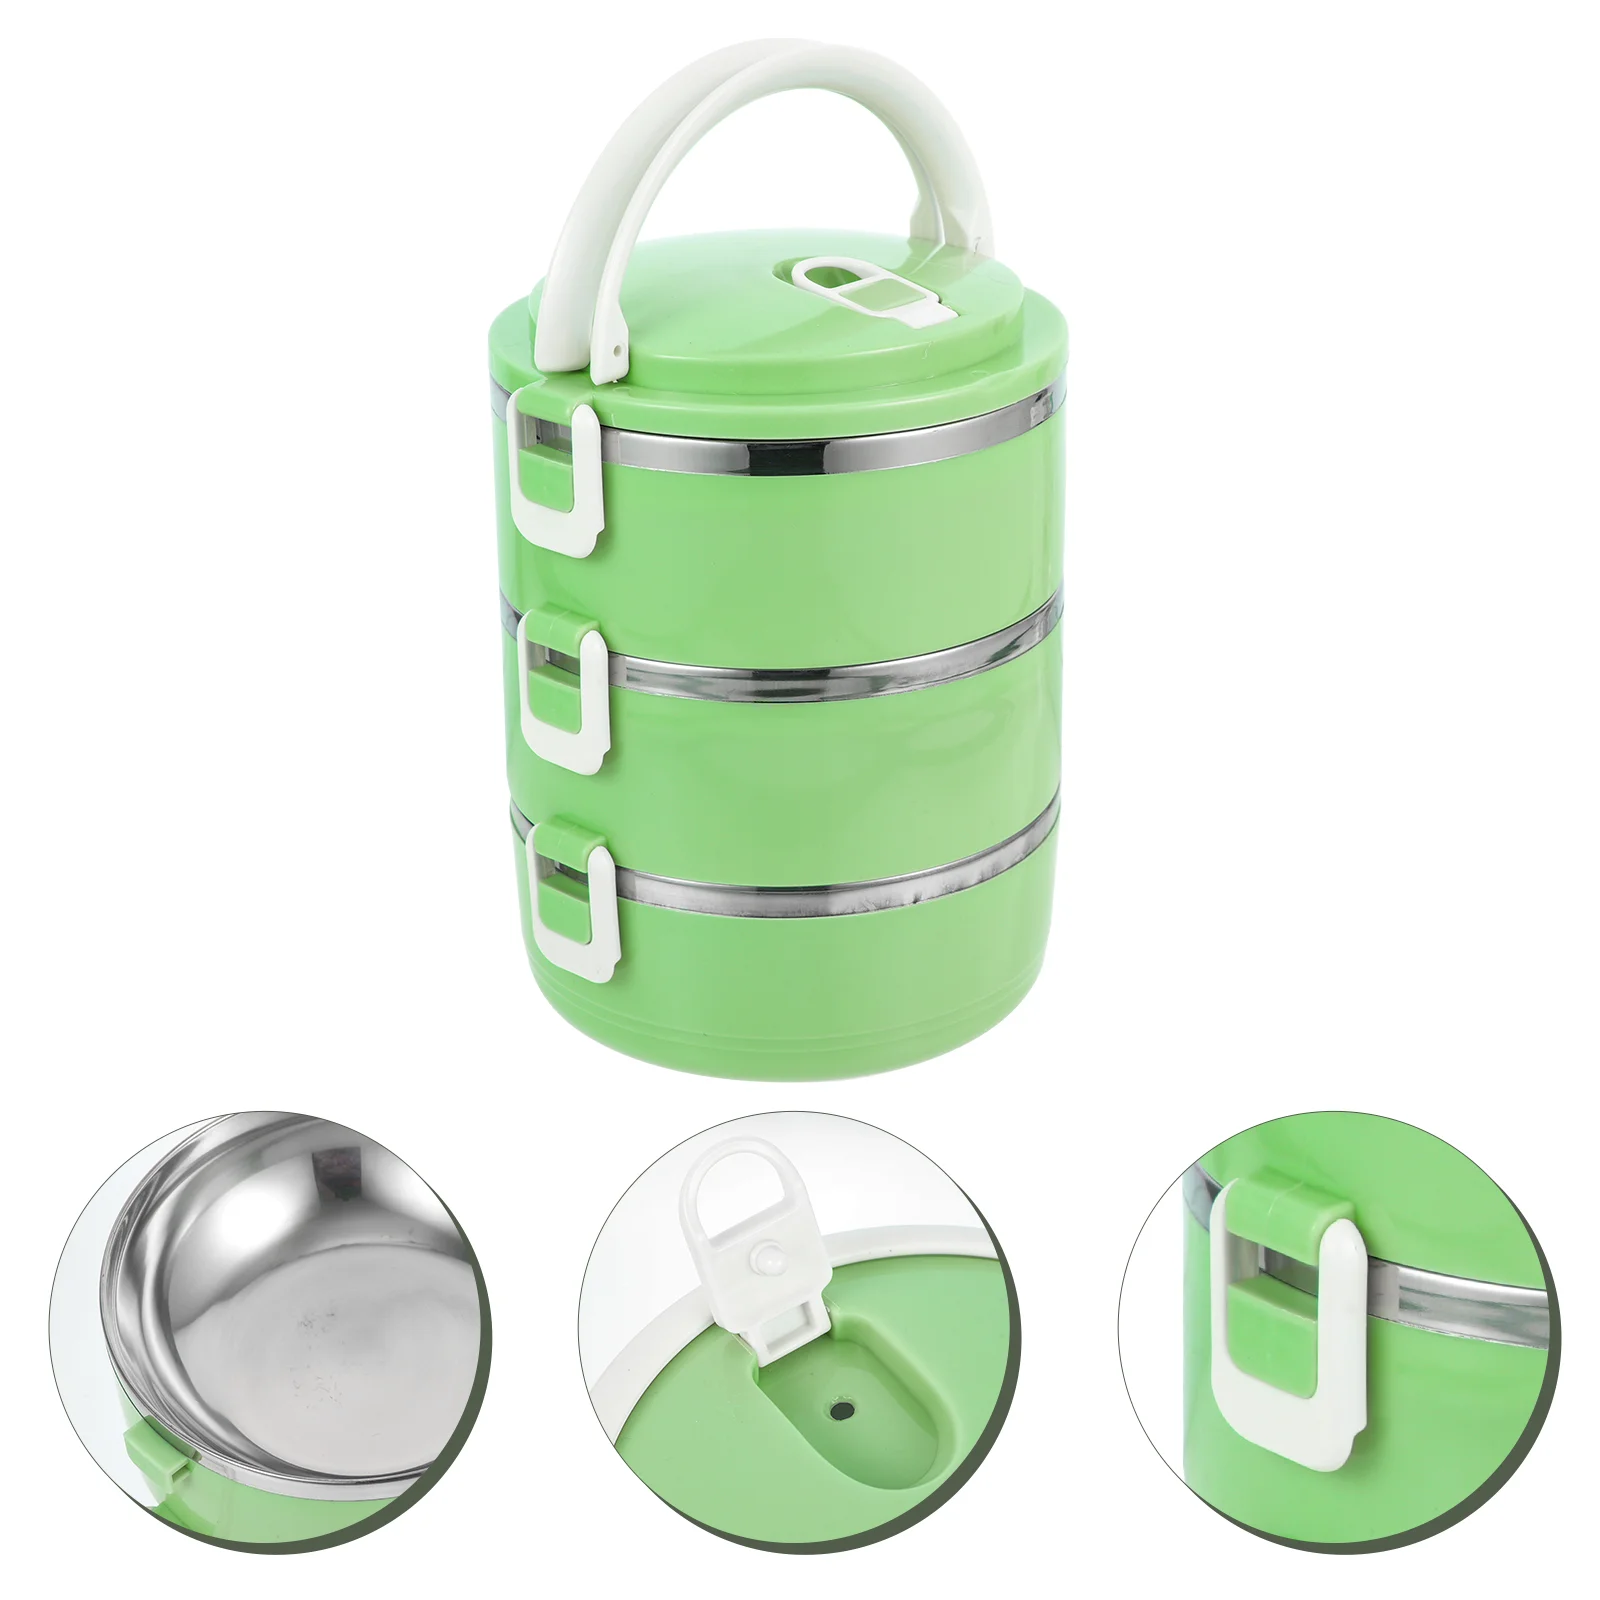 

Box Lunch Bento Stackable Container Stainless Steel Containers Insulated Compartment Portable Tiffin Tierstacking Thermal